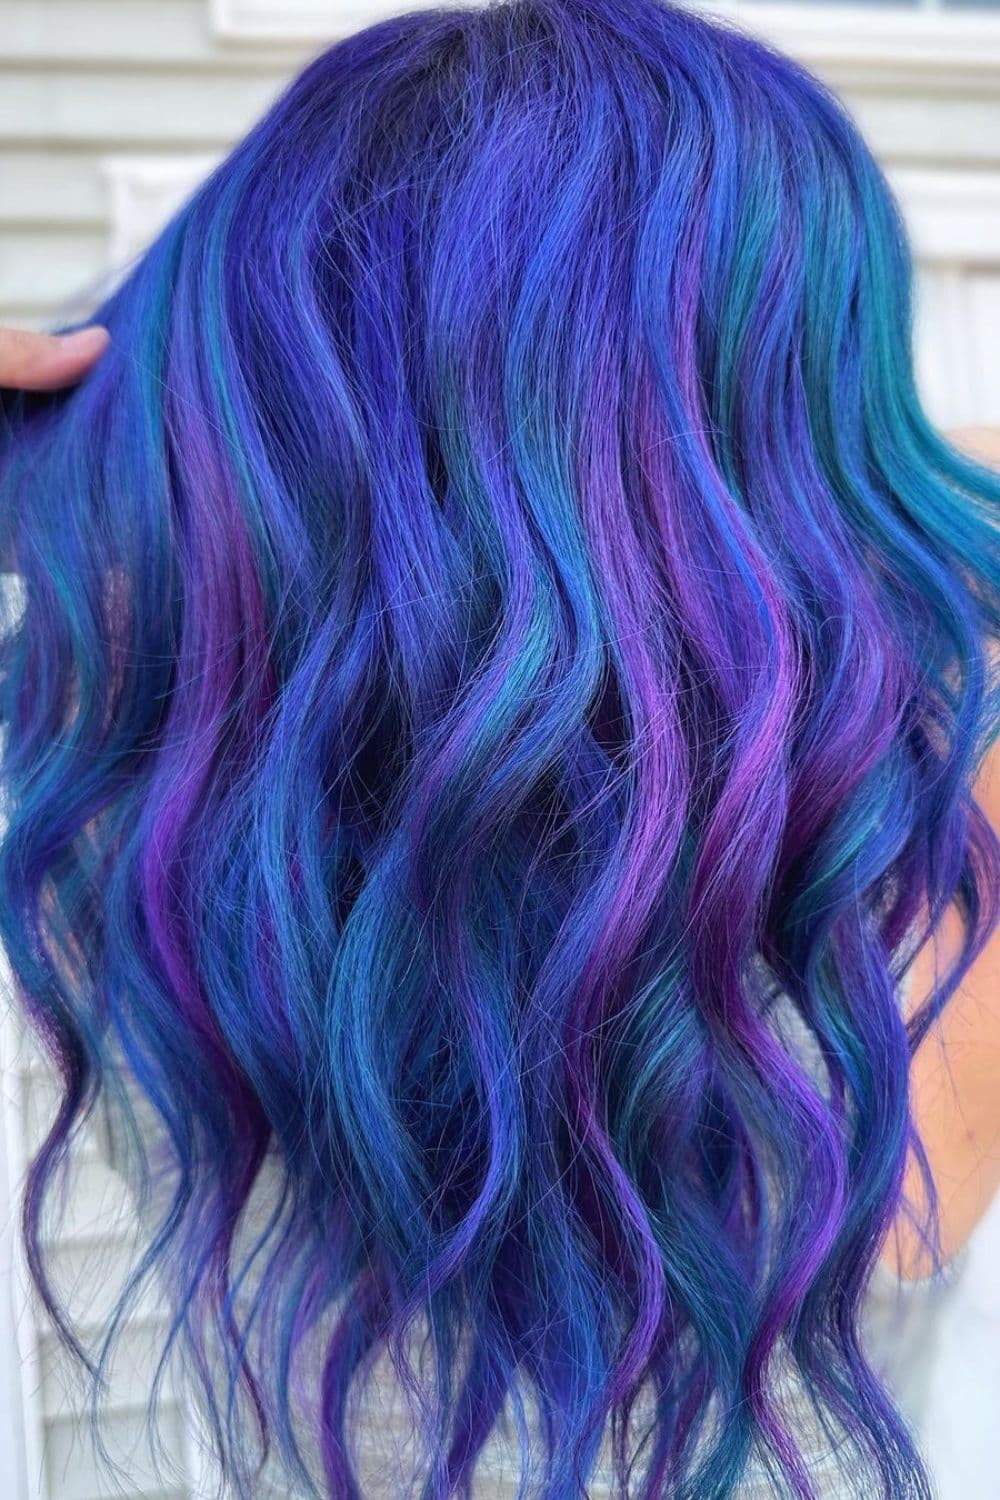 A woman with blue hair with violet tones with beach waves.